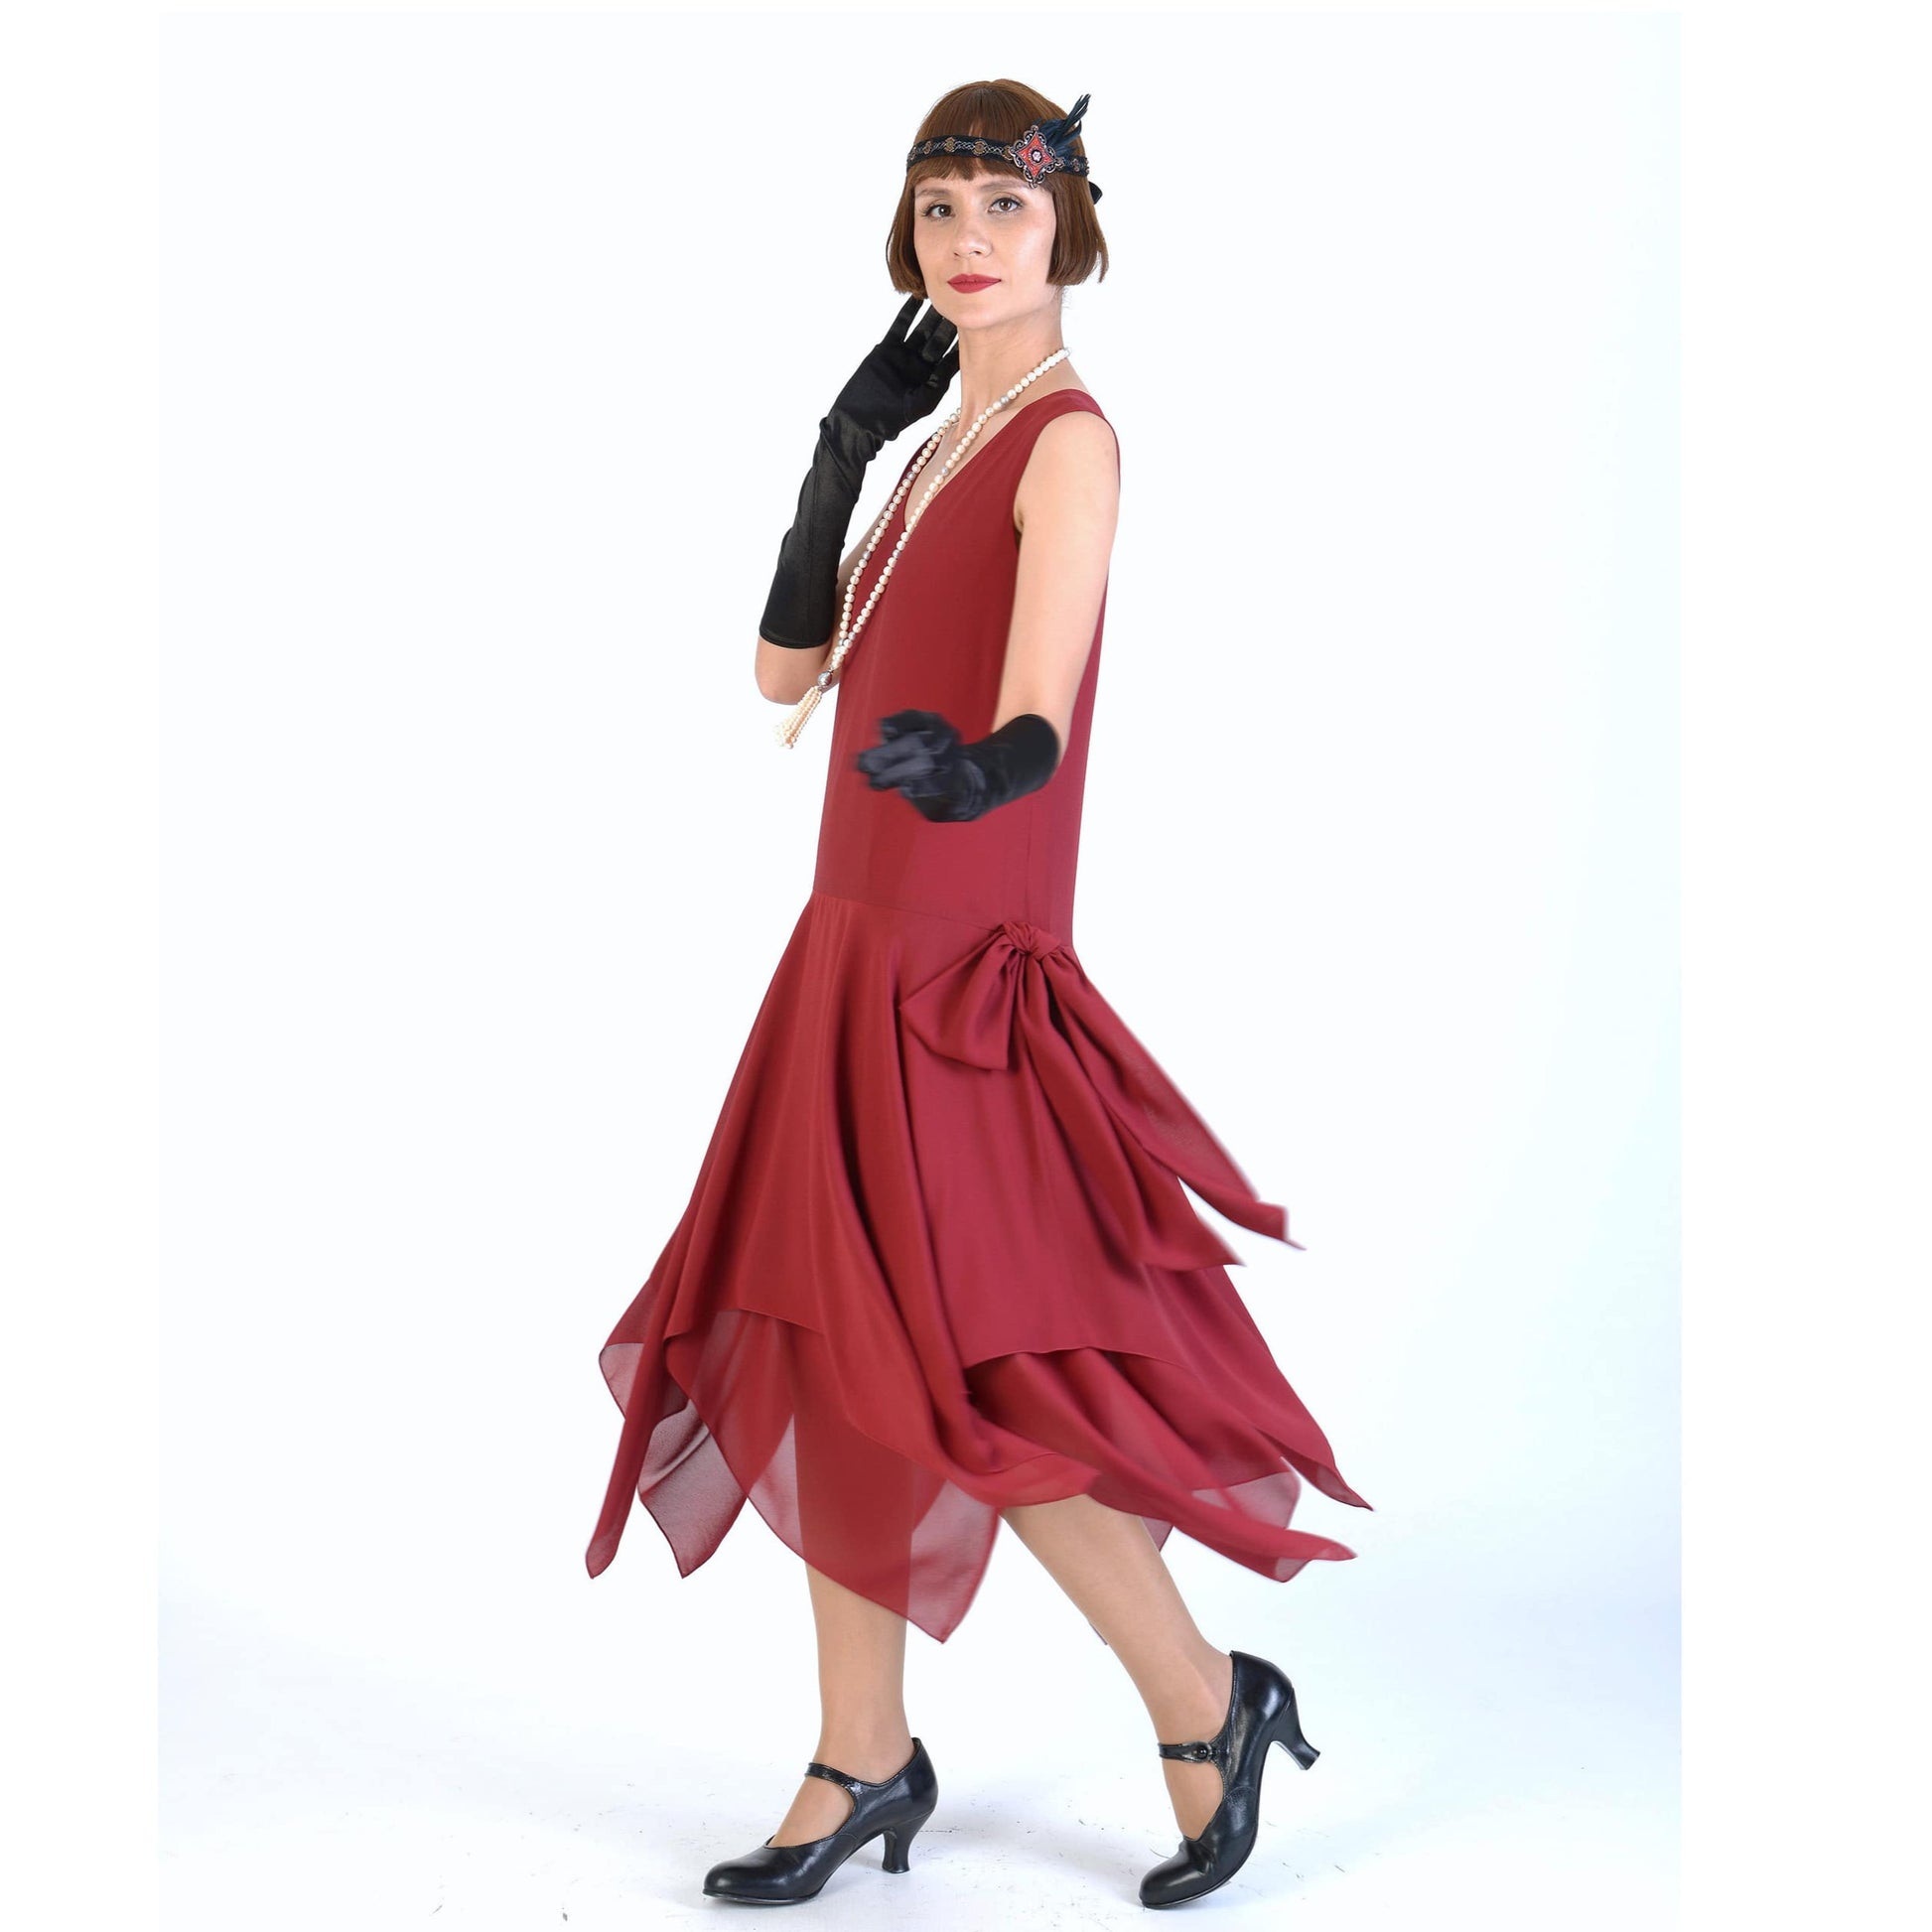 1920s evening dress with handkerchief skirt made of maroon red chiffon, great as a Charleston dance dress.